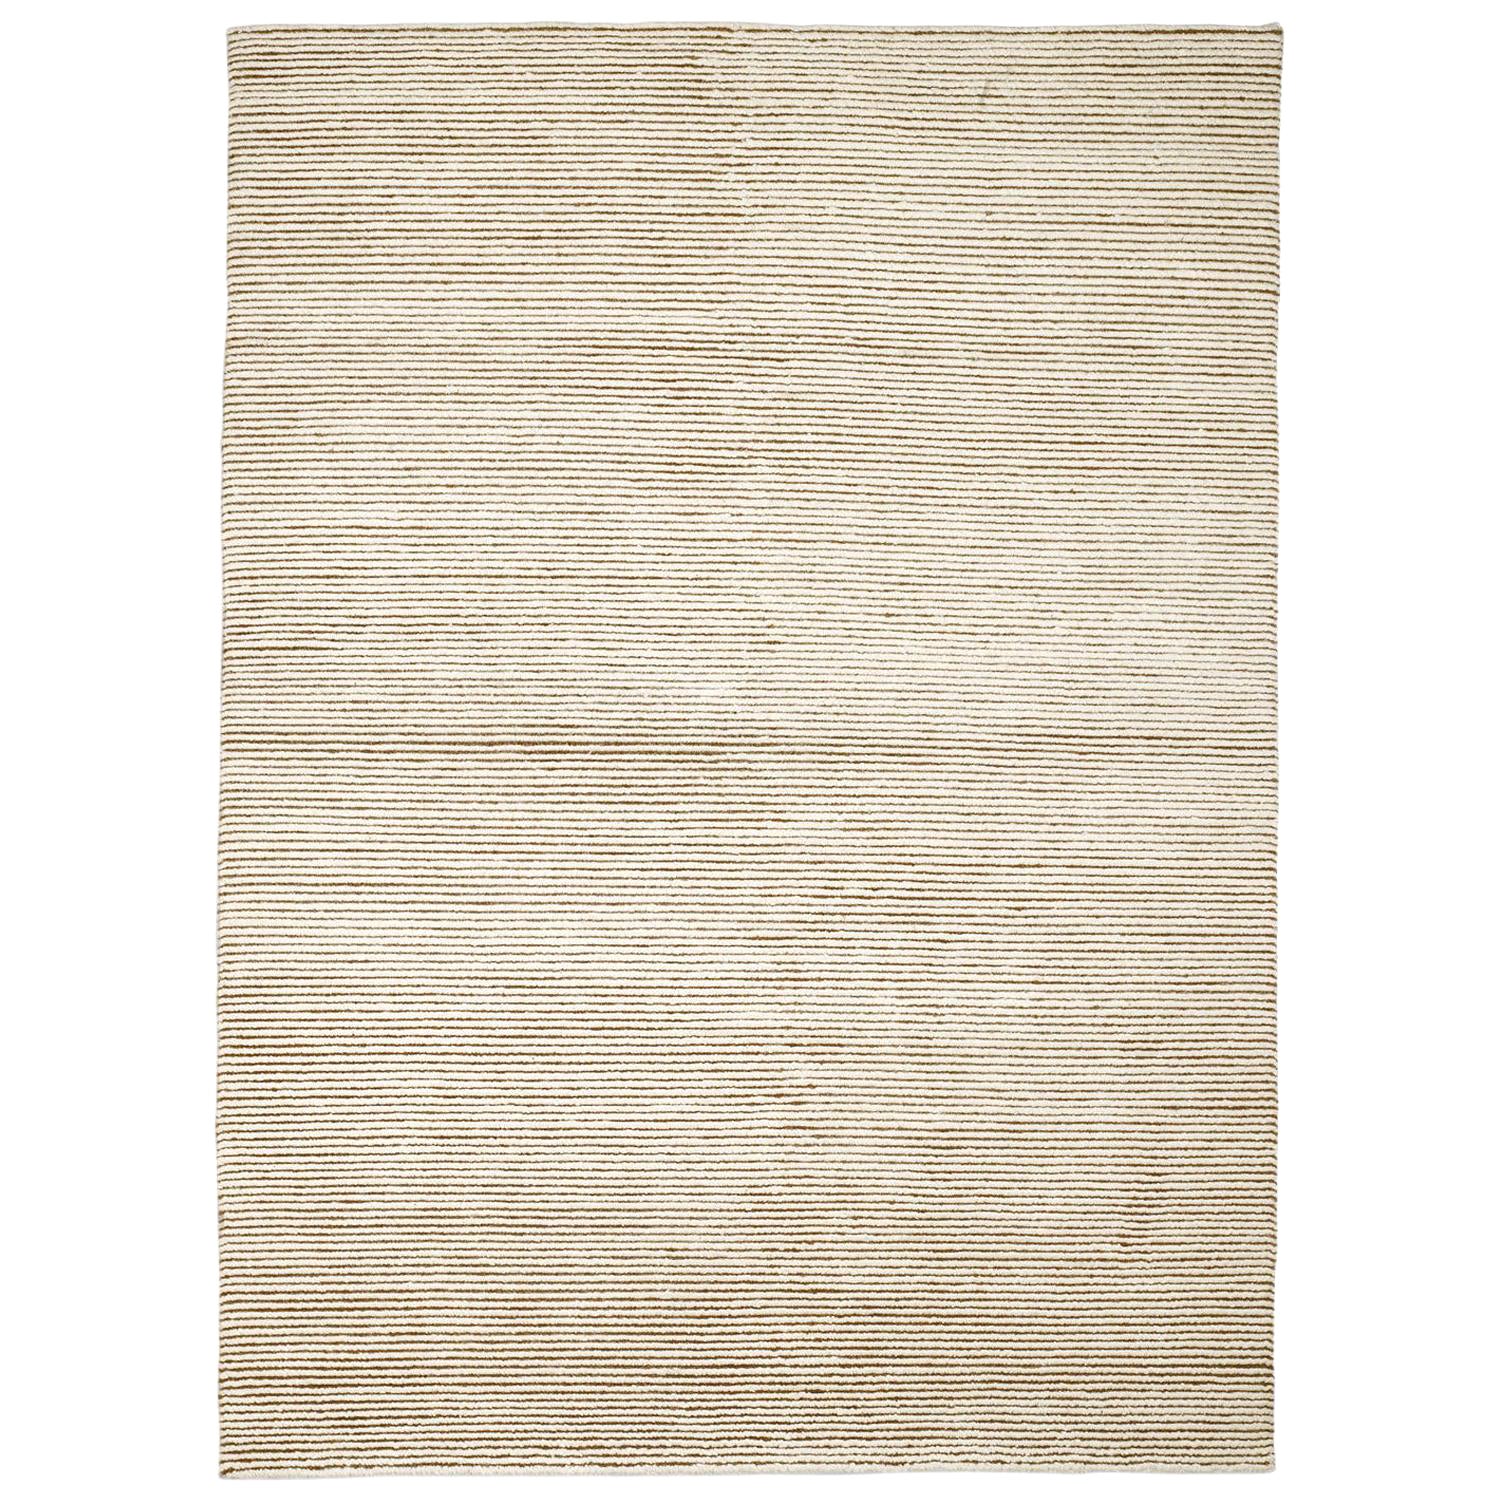 Contemporary Warm Ivory Wool Durable Rug by Deanna Comellini In Stock 170x240 cm